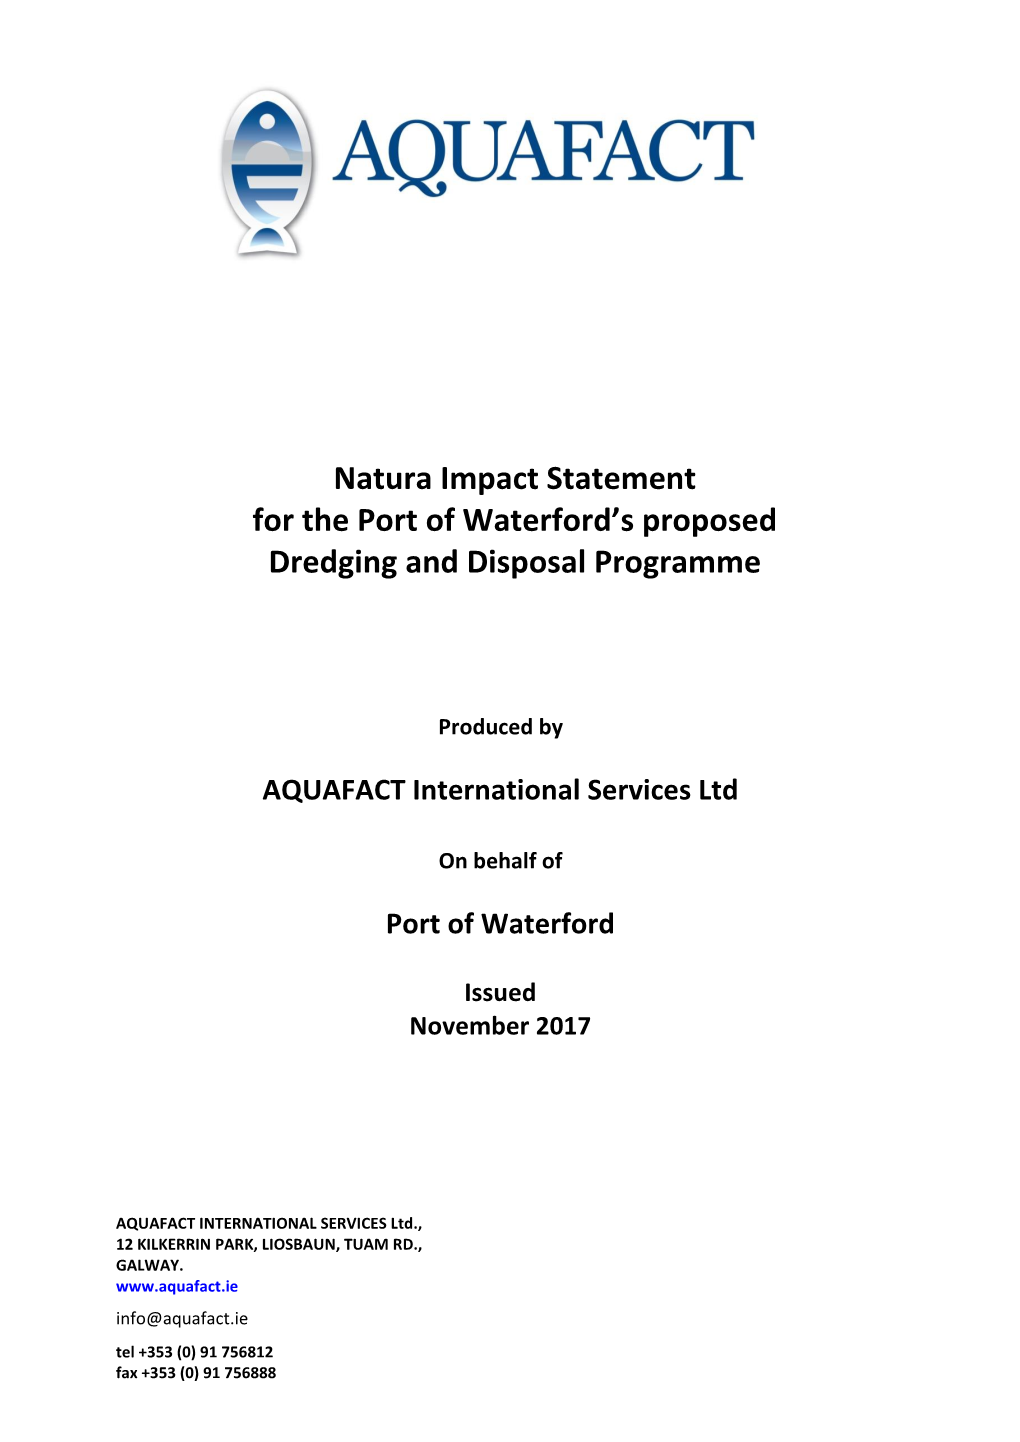 Natura Impact Statement for the Port of Waterford's Proposed Dredging